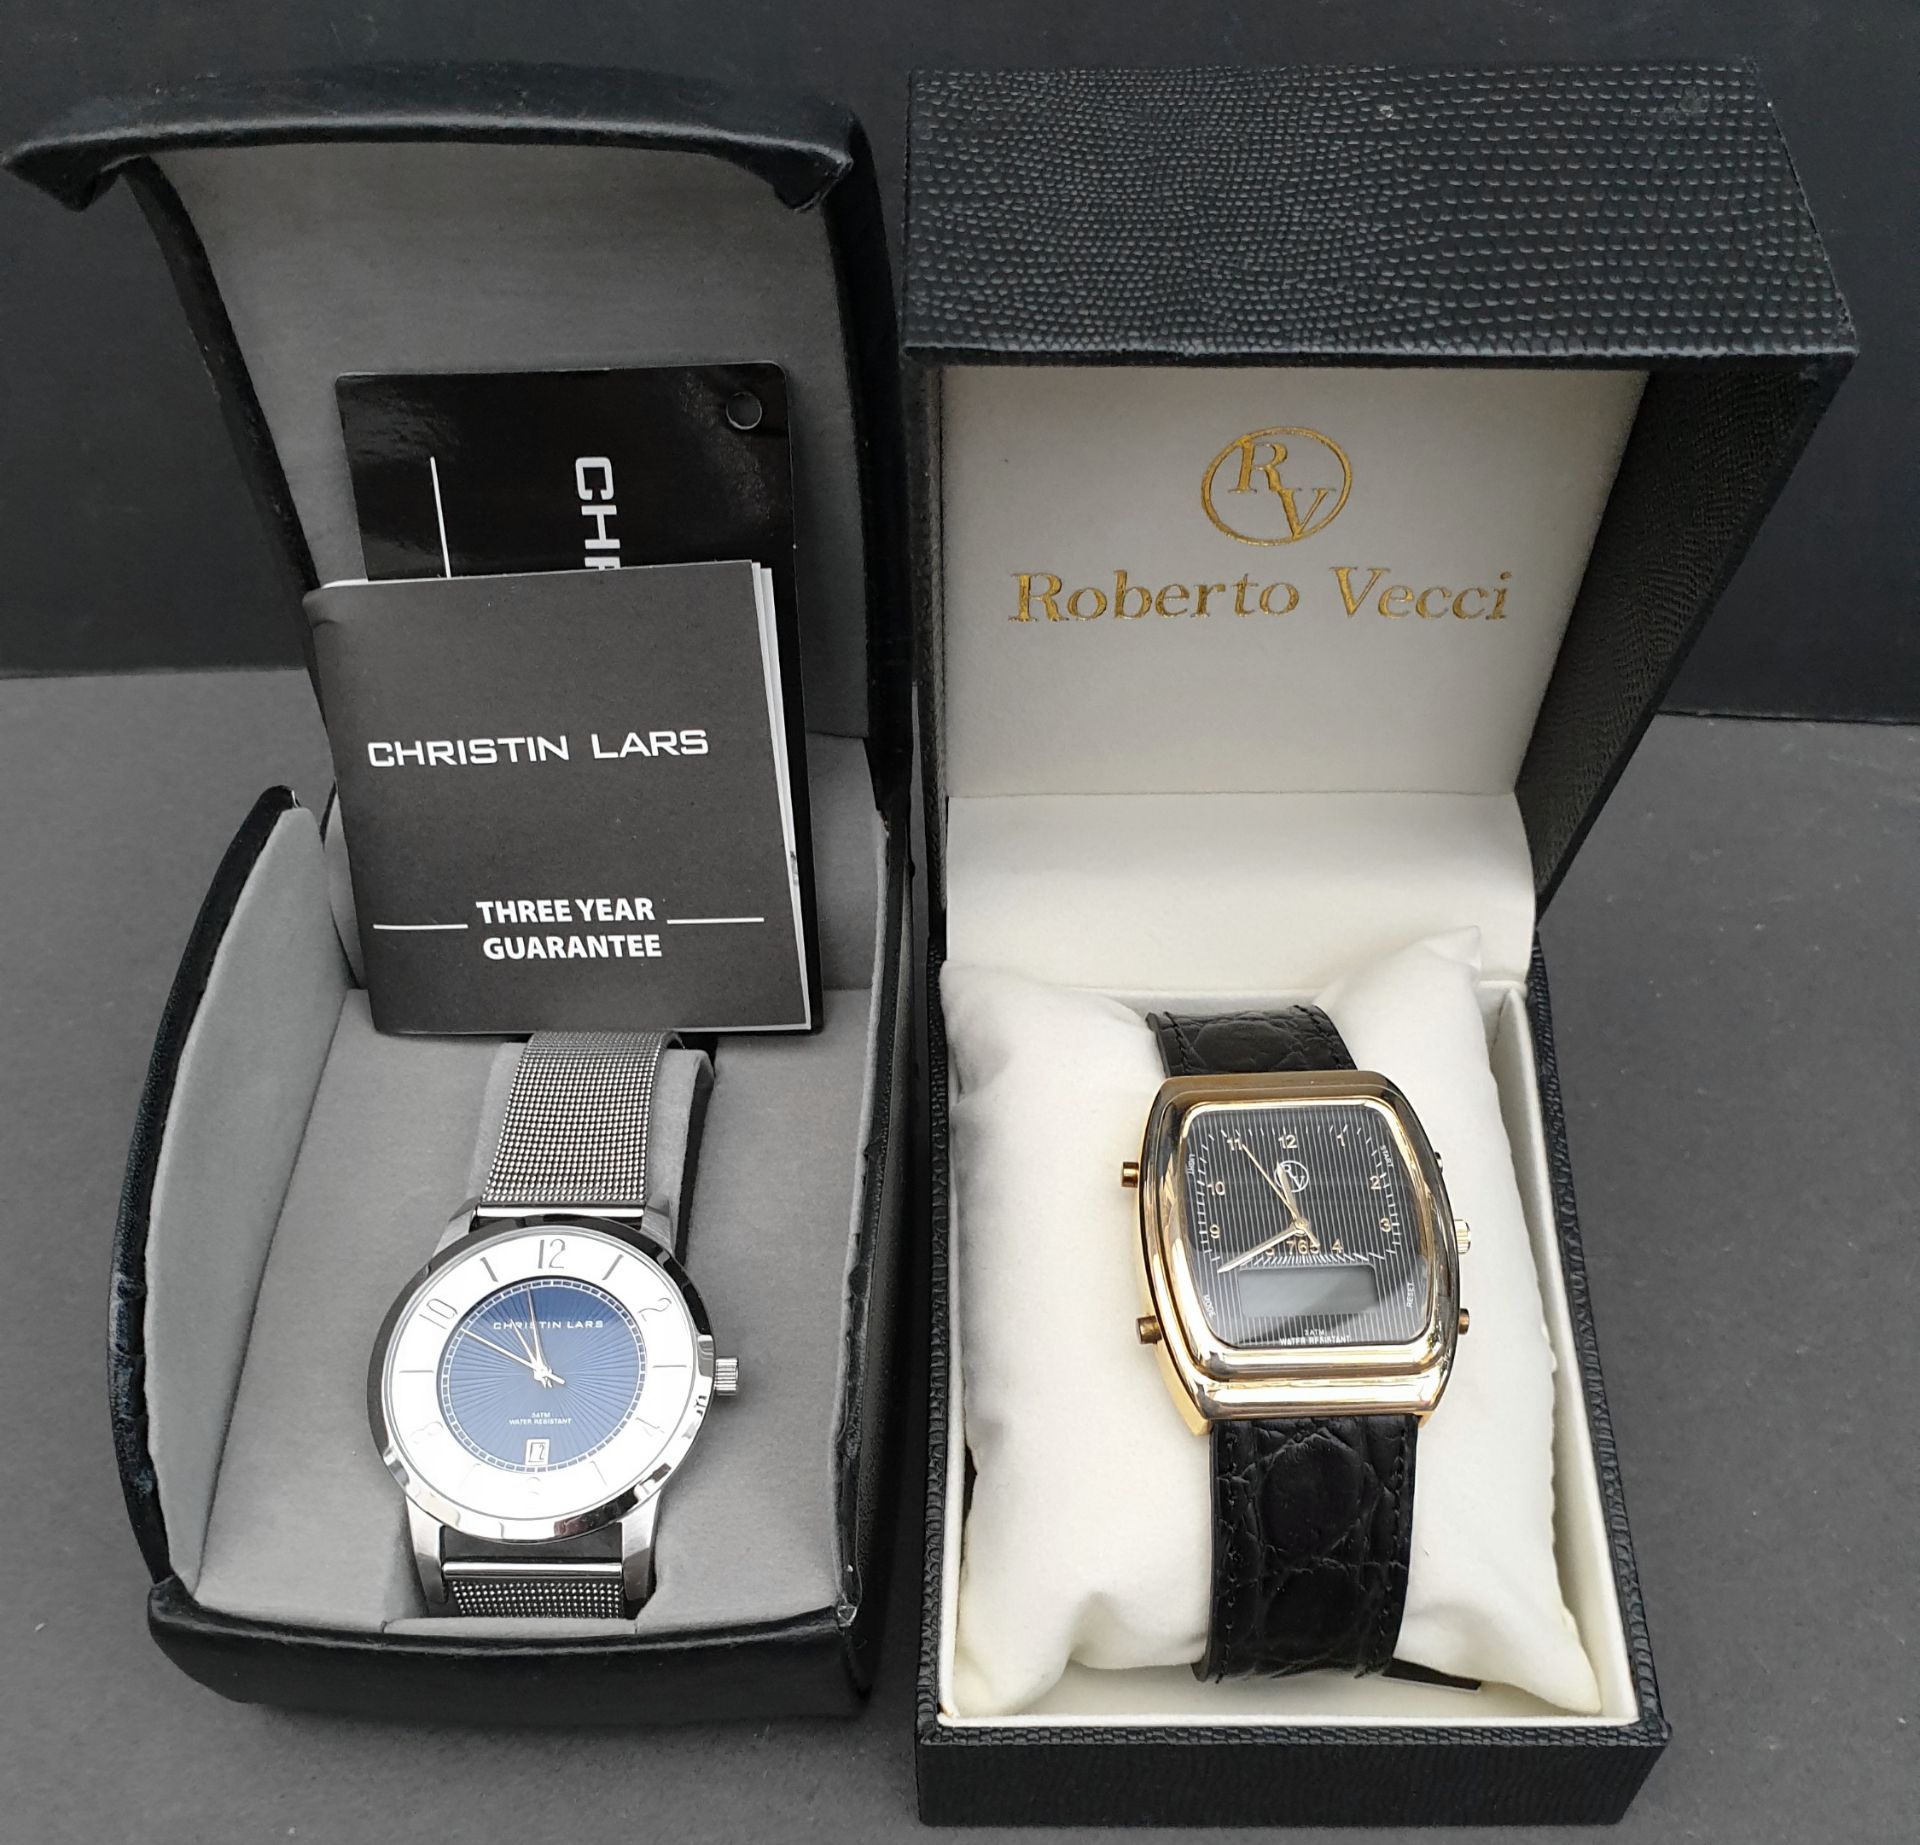 Collectable 2 Wrist Watches Roberto Vecci & Christin Lars Boxed